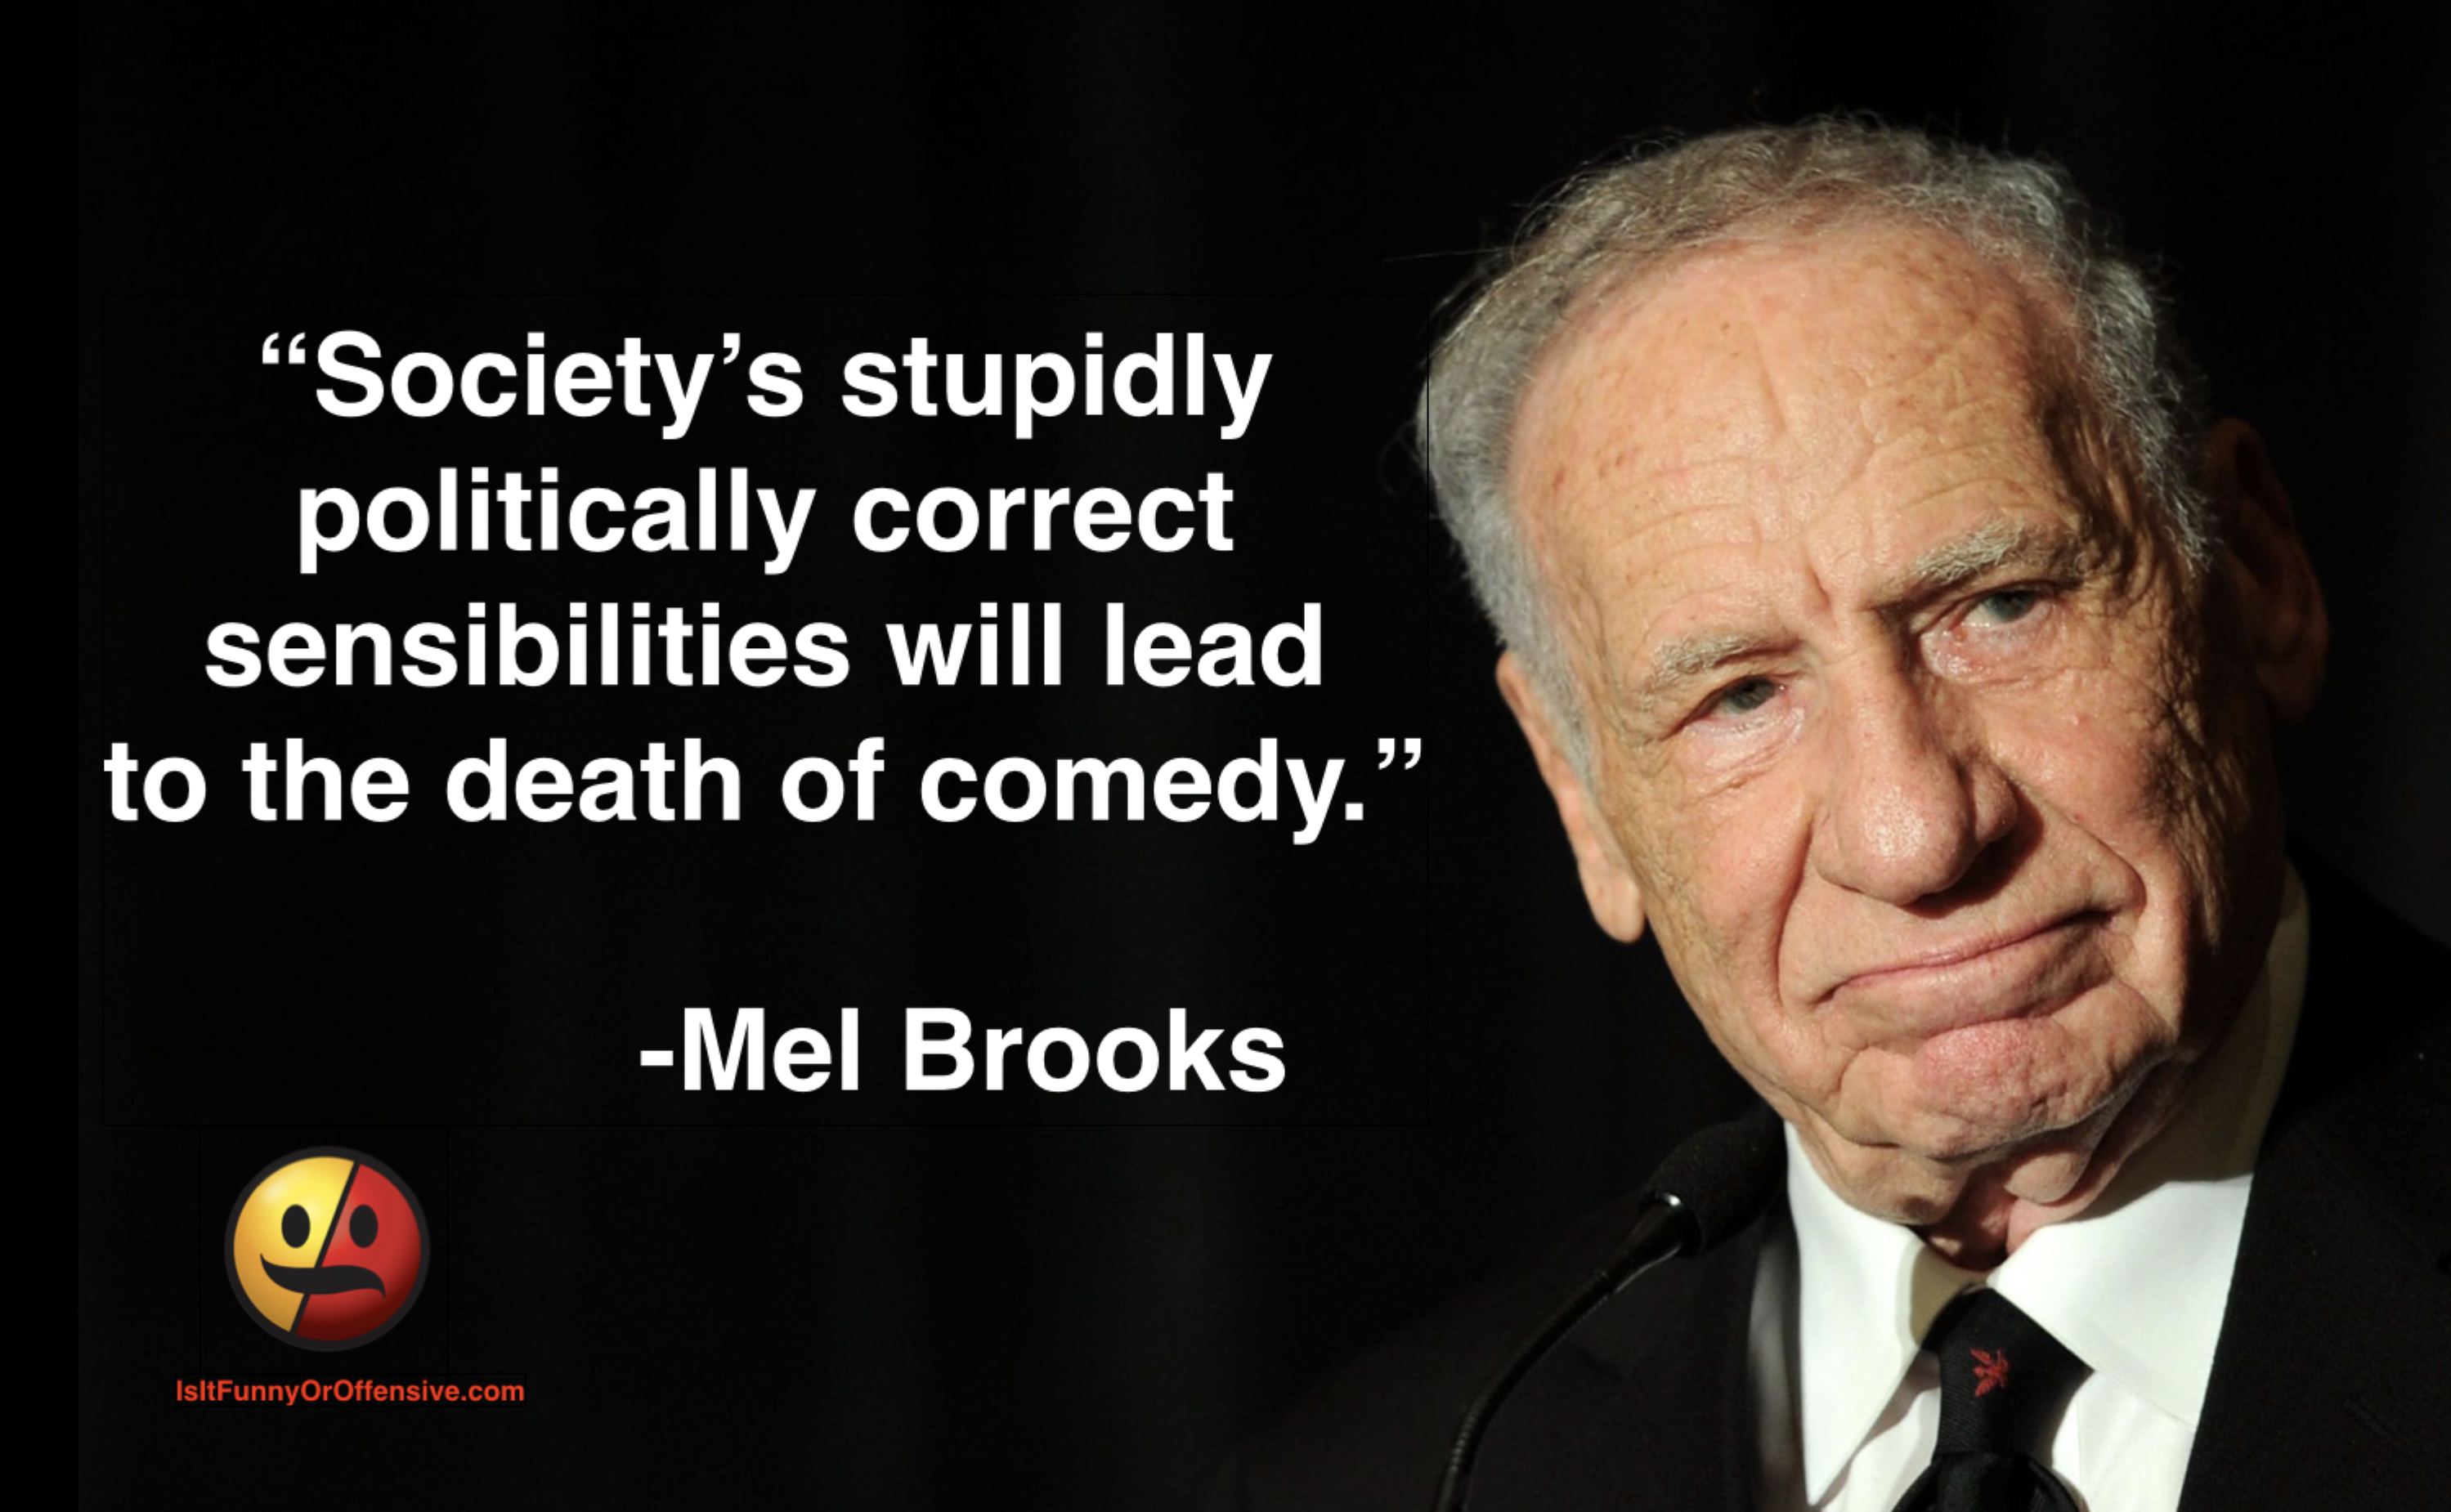 Mel Brooks on Political Correctness and Comedy